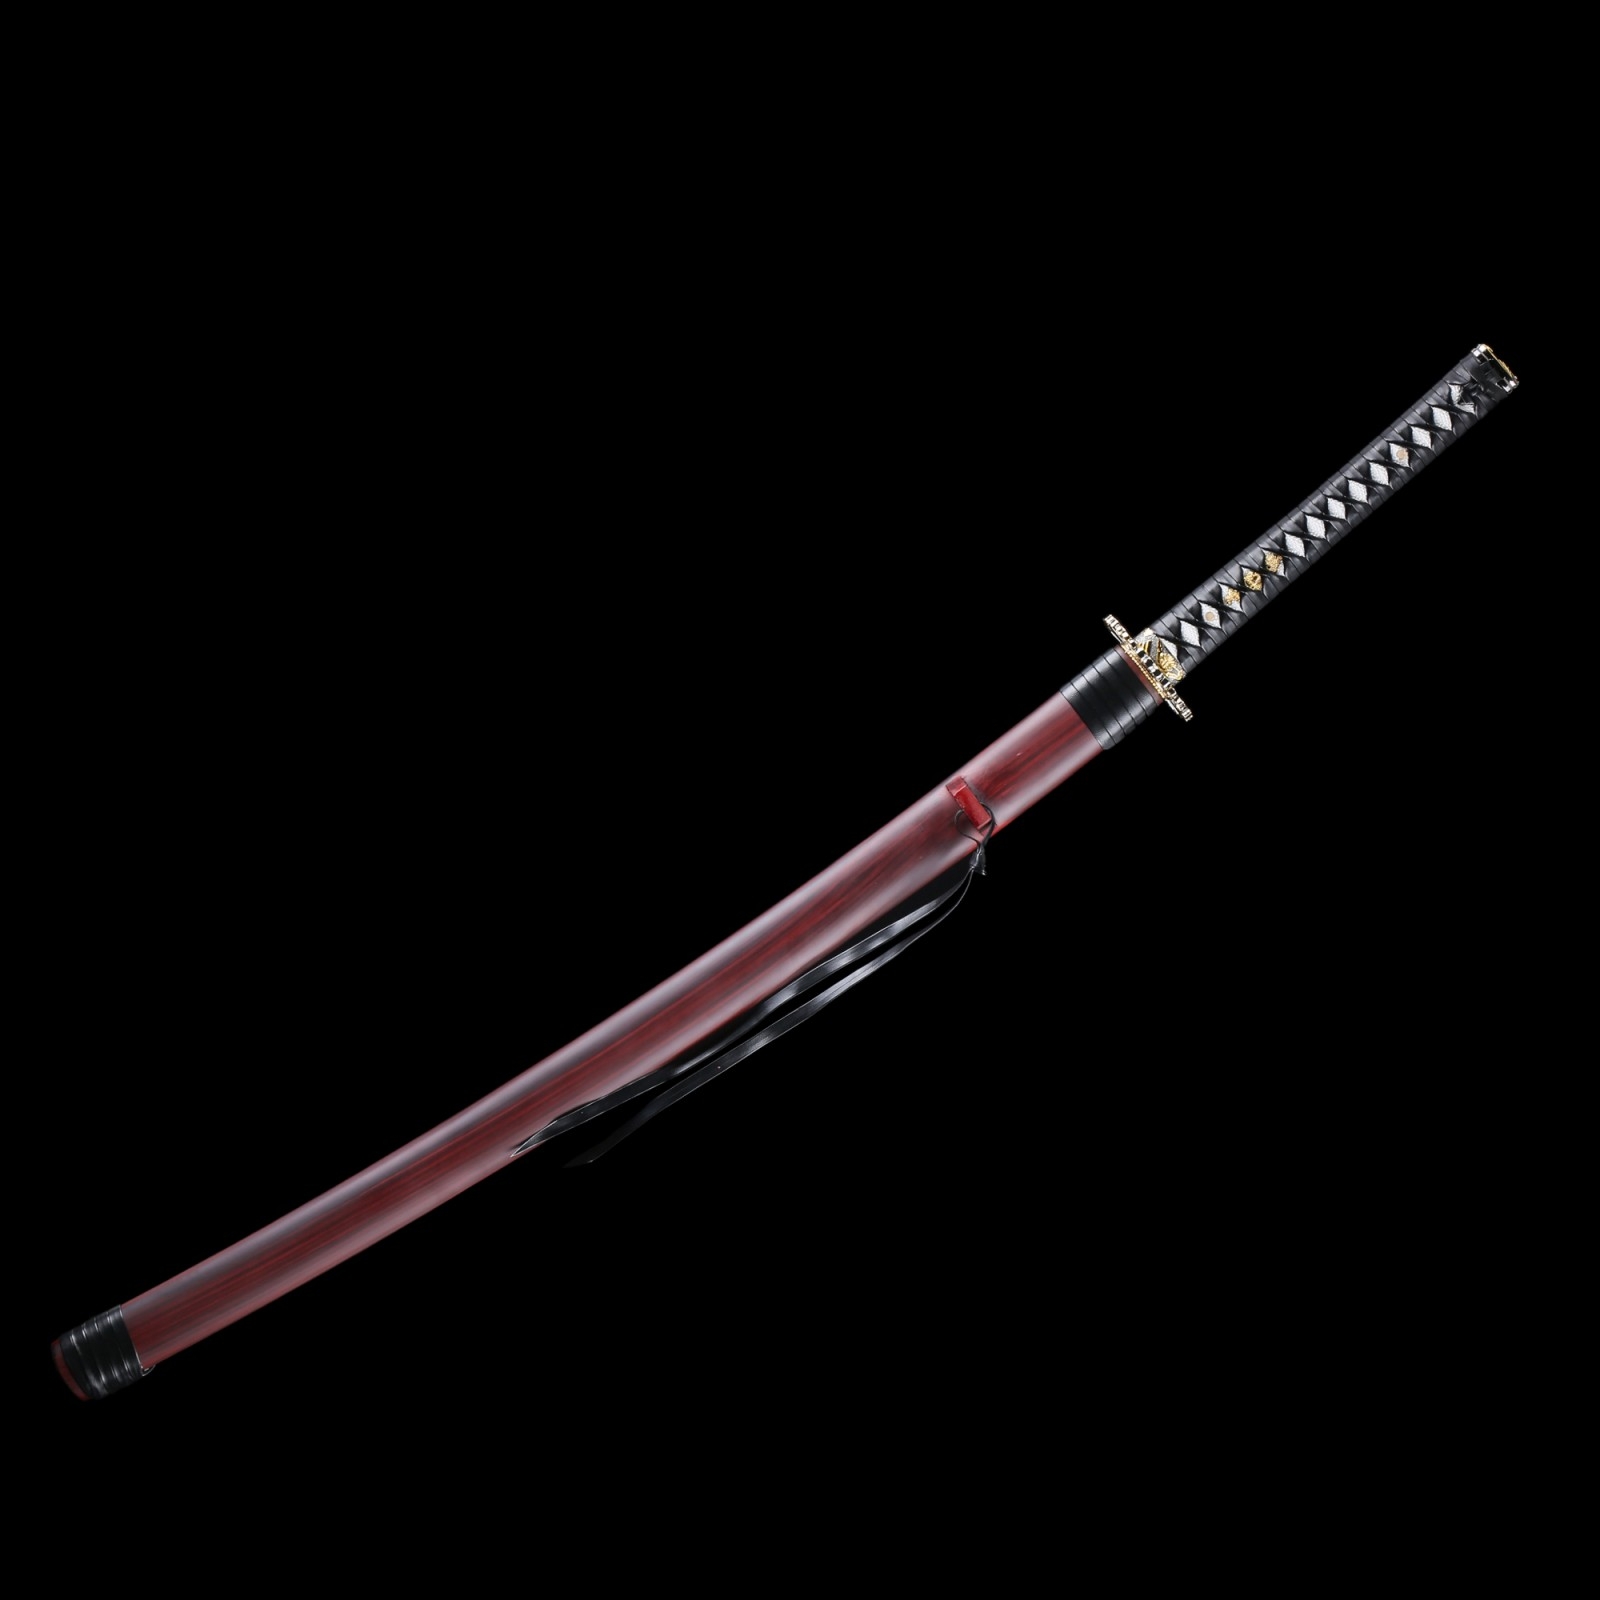 Black And Red Katana Handmade Japanese Samurai Sword 1060 Carbon Steel With Red Scabbard